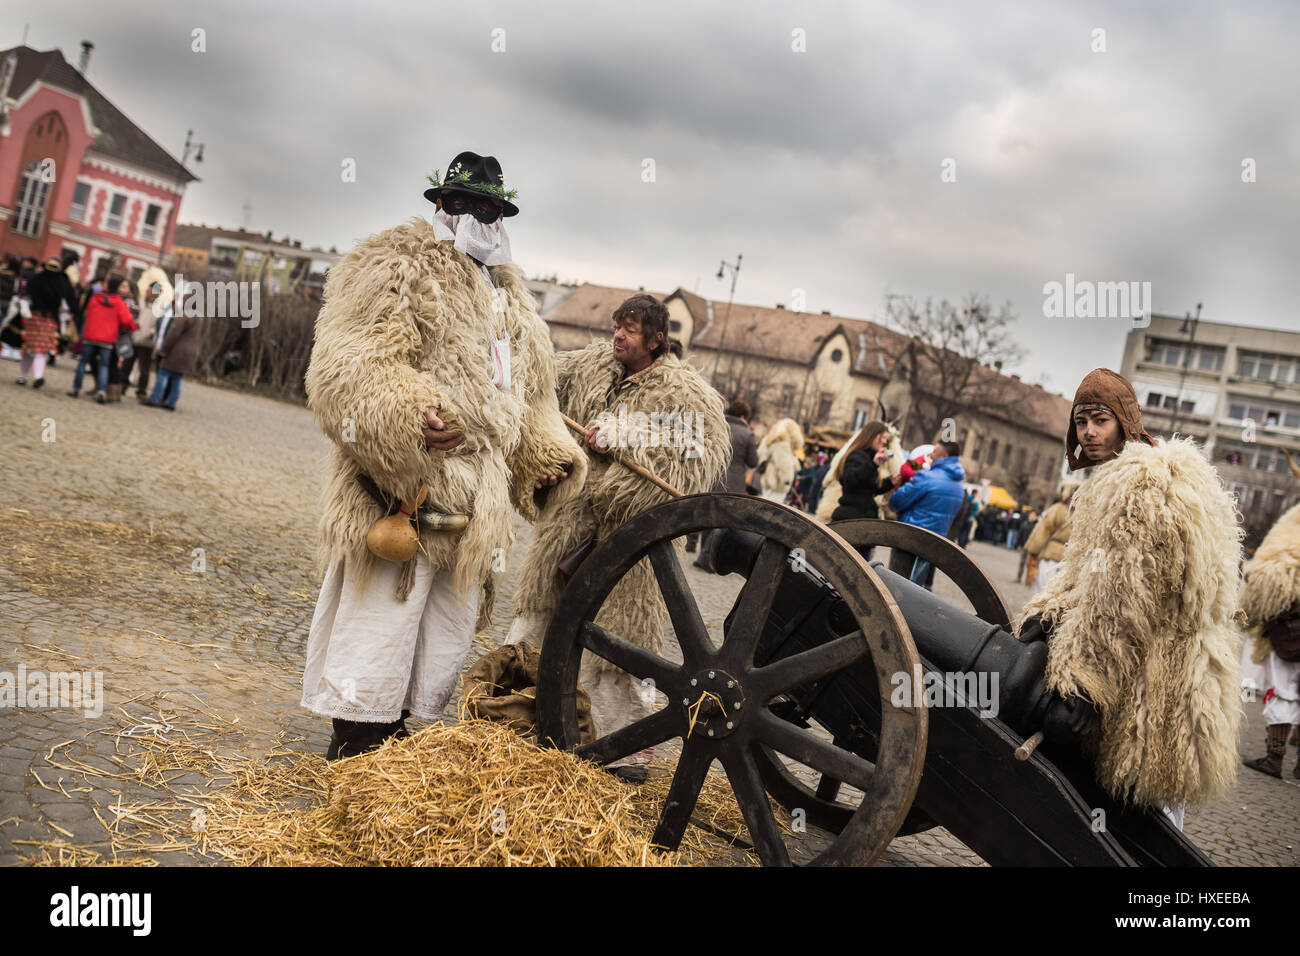 'Busos' ready to fire the cannon on the annual Buso festivities event in Mohacs, Hungary Stock Photo